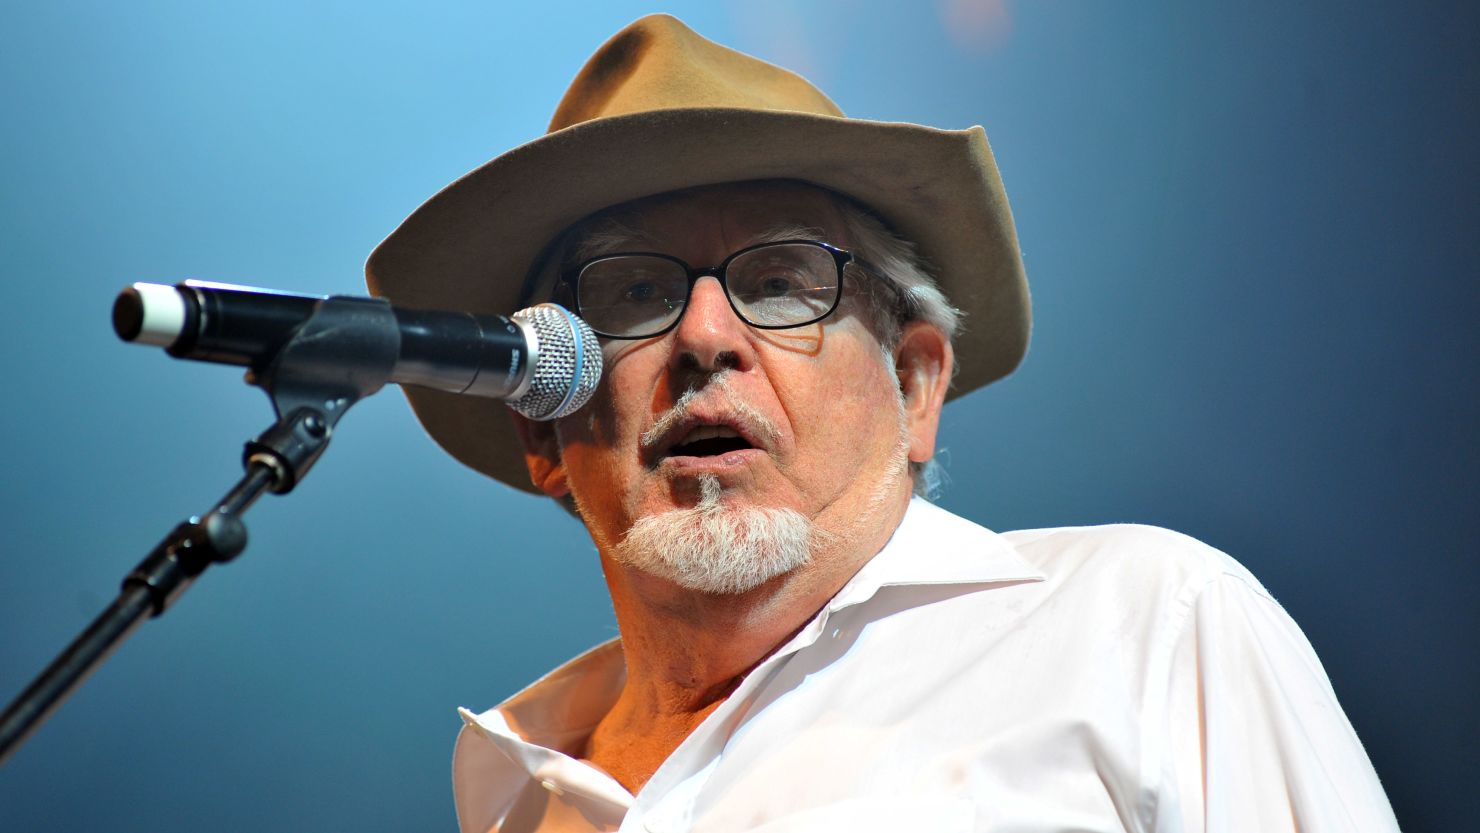 Rolf Harris performs on stage during the final day of the Womad Festival on July 25, 2010 in Wiltshire, England.